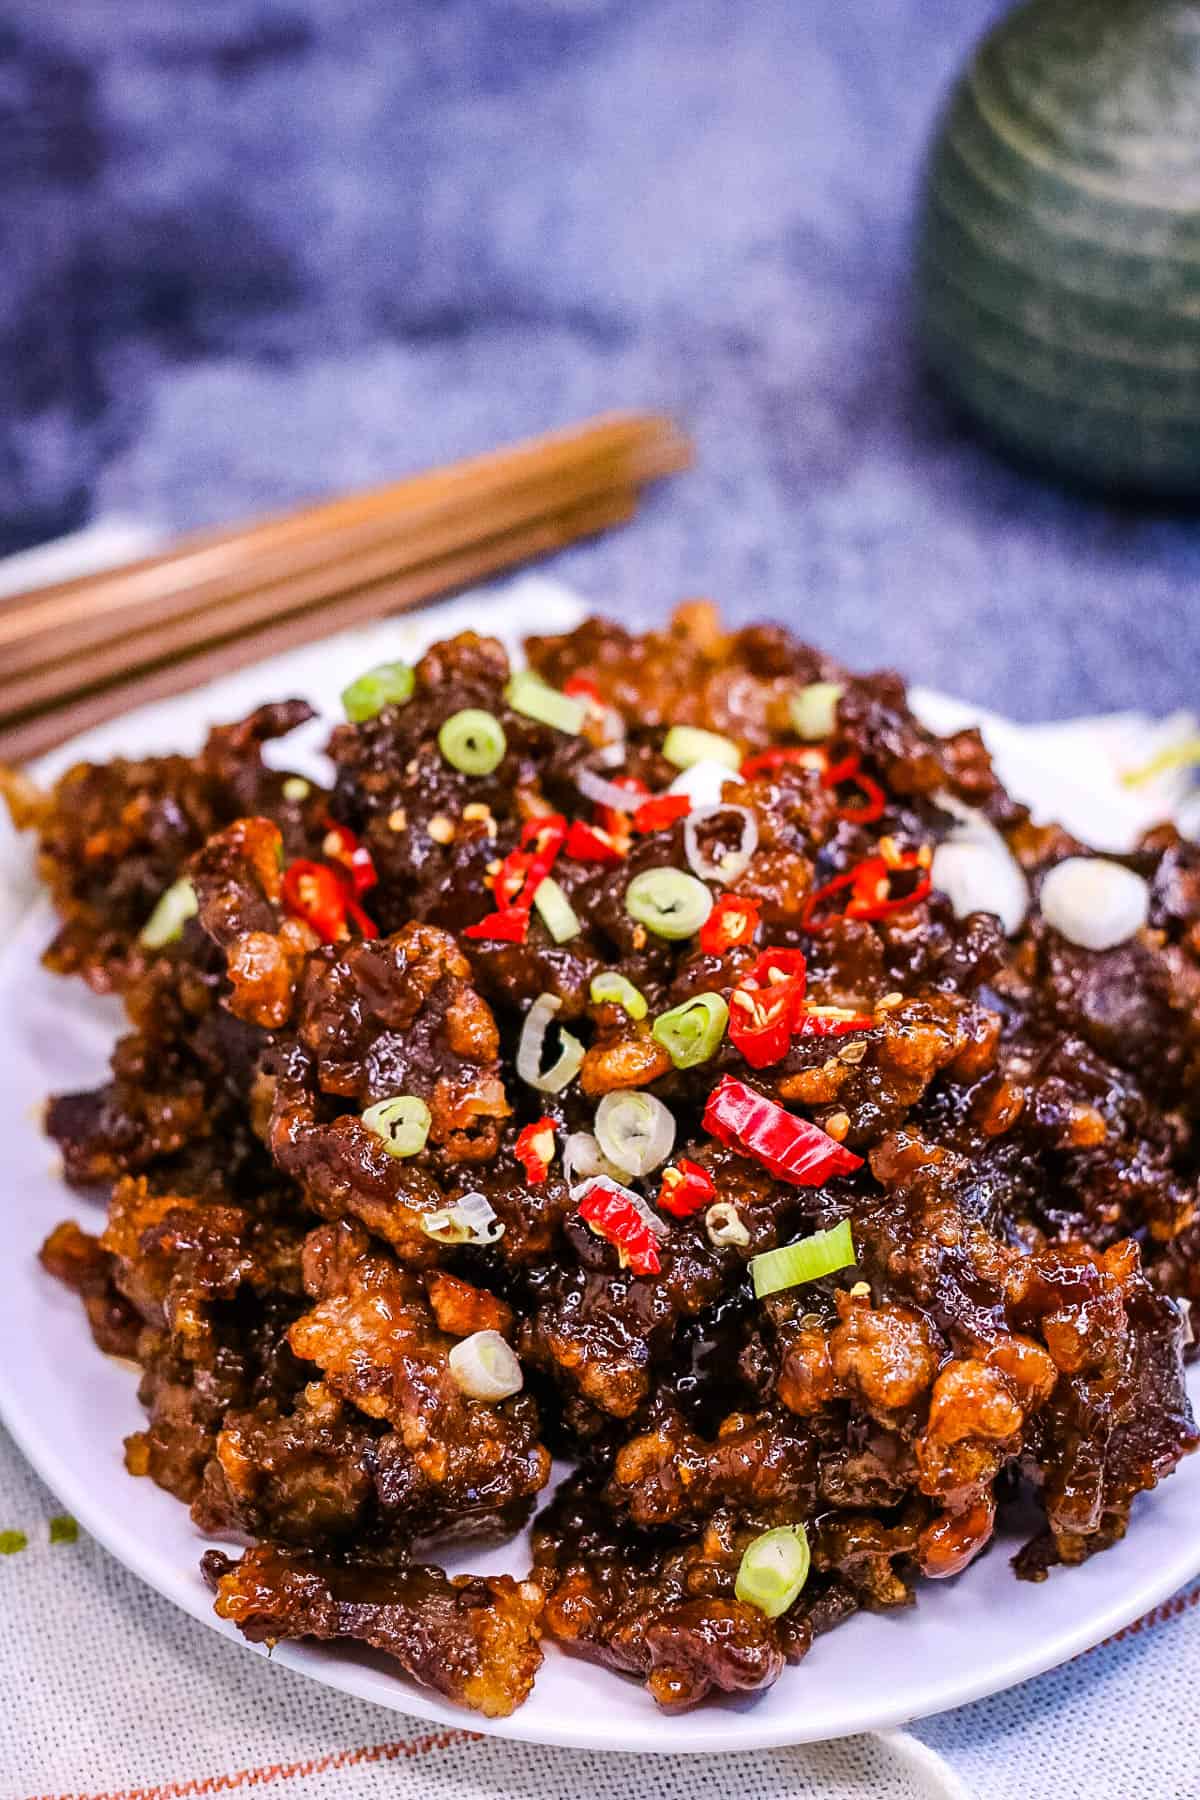 Low angle shot of a plate of crispy chilli beef garnished with green onions and sliced hot red chiles.